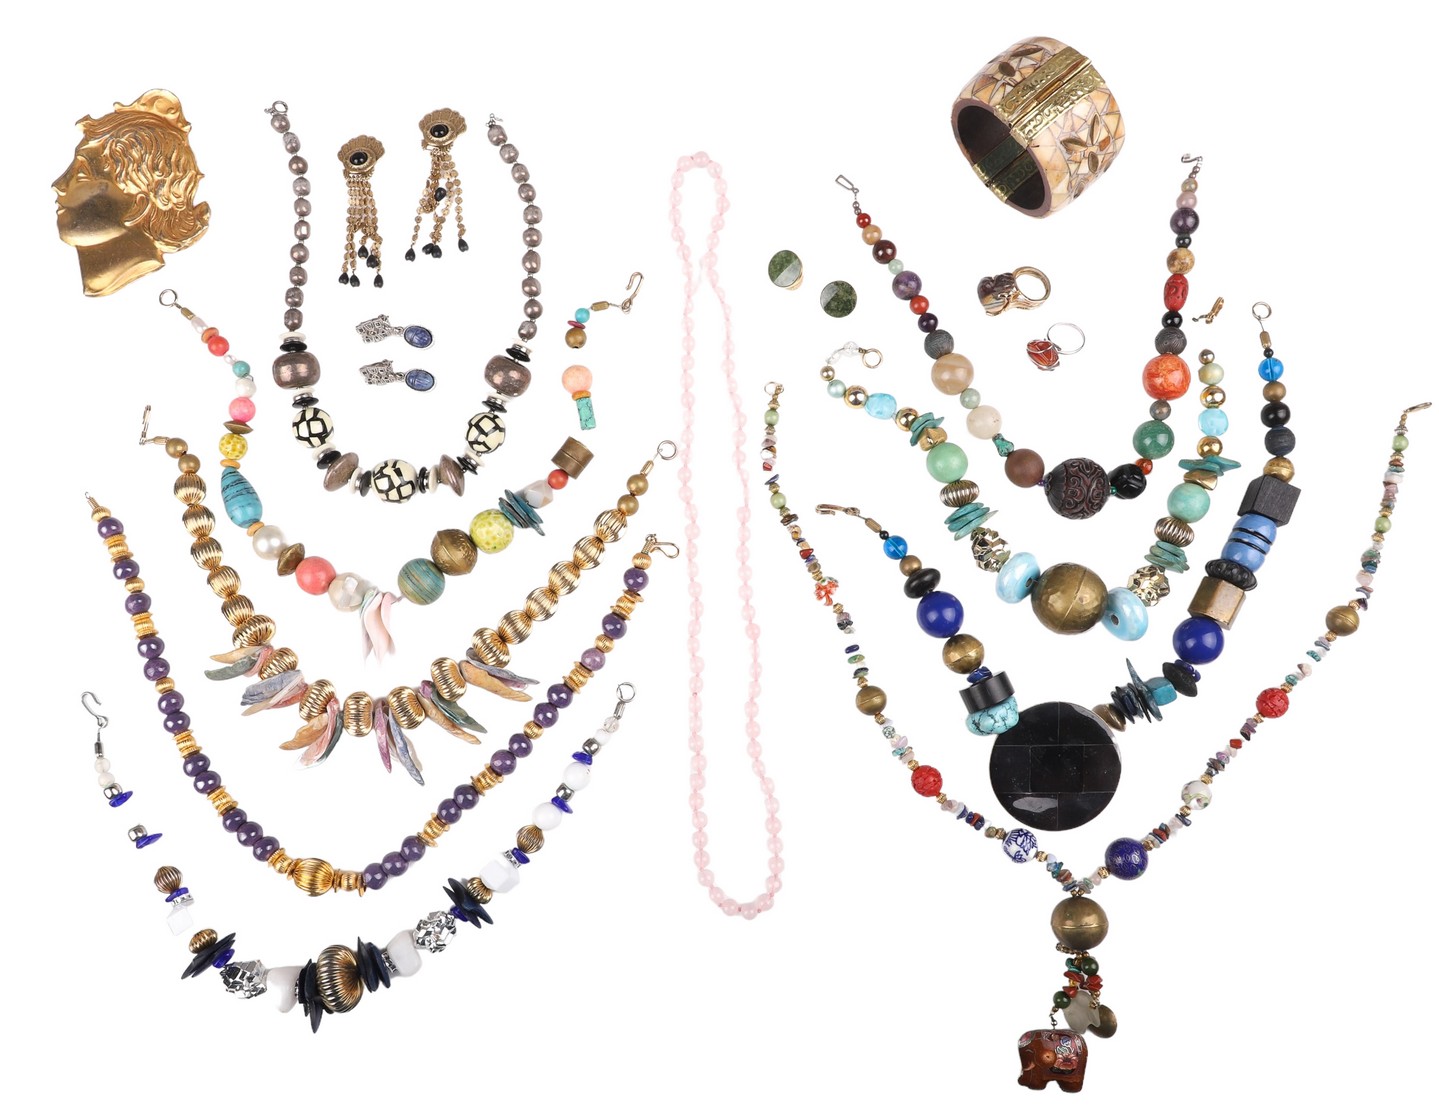 Eclectic costume jewelry grouping